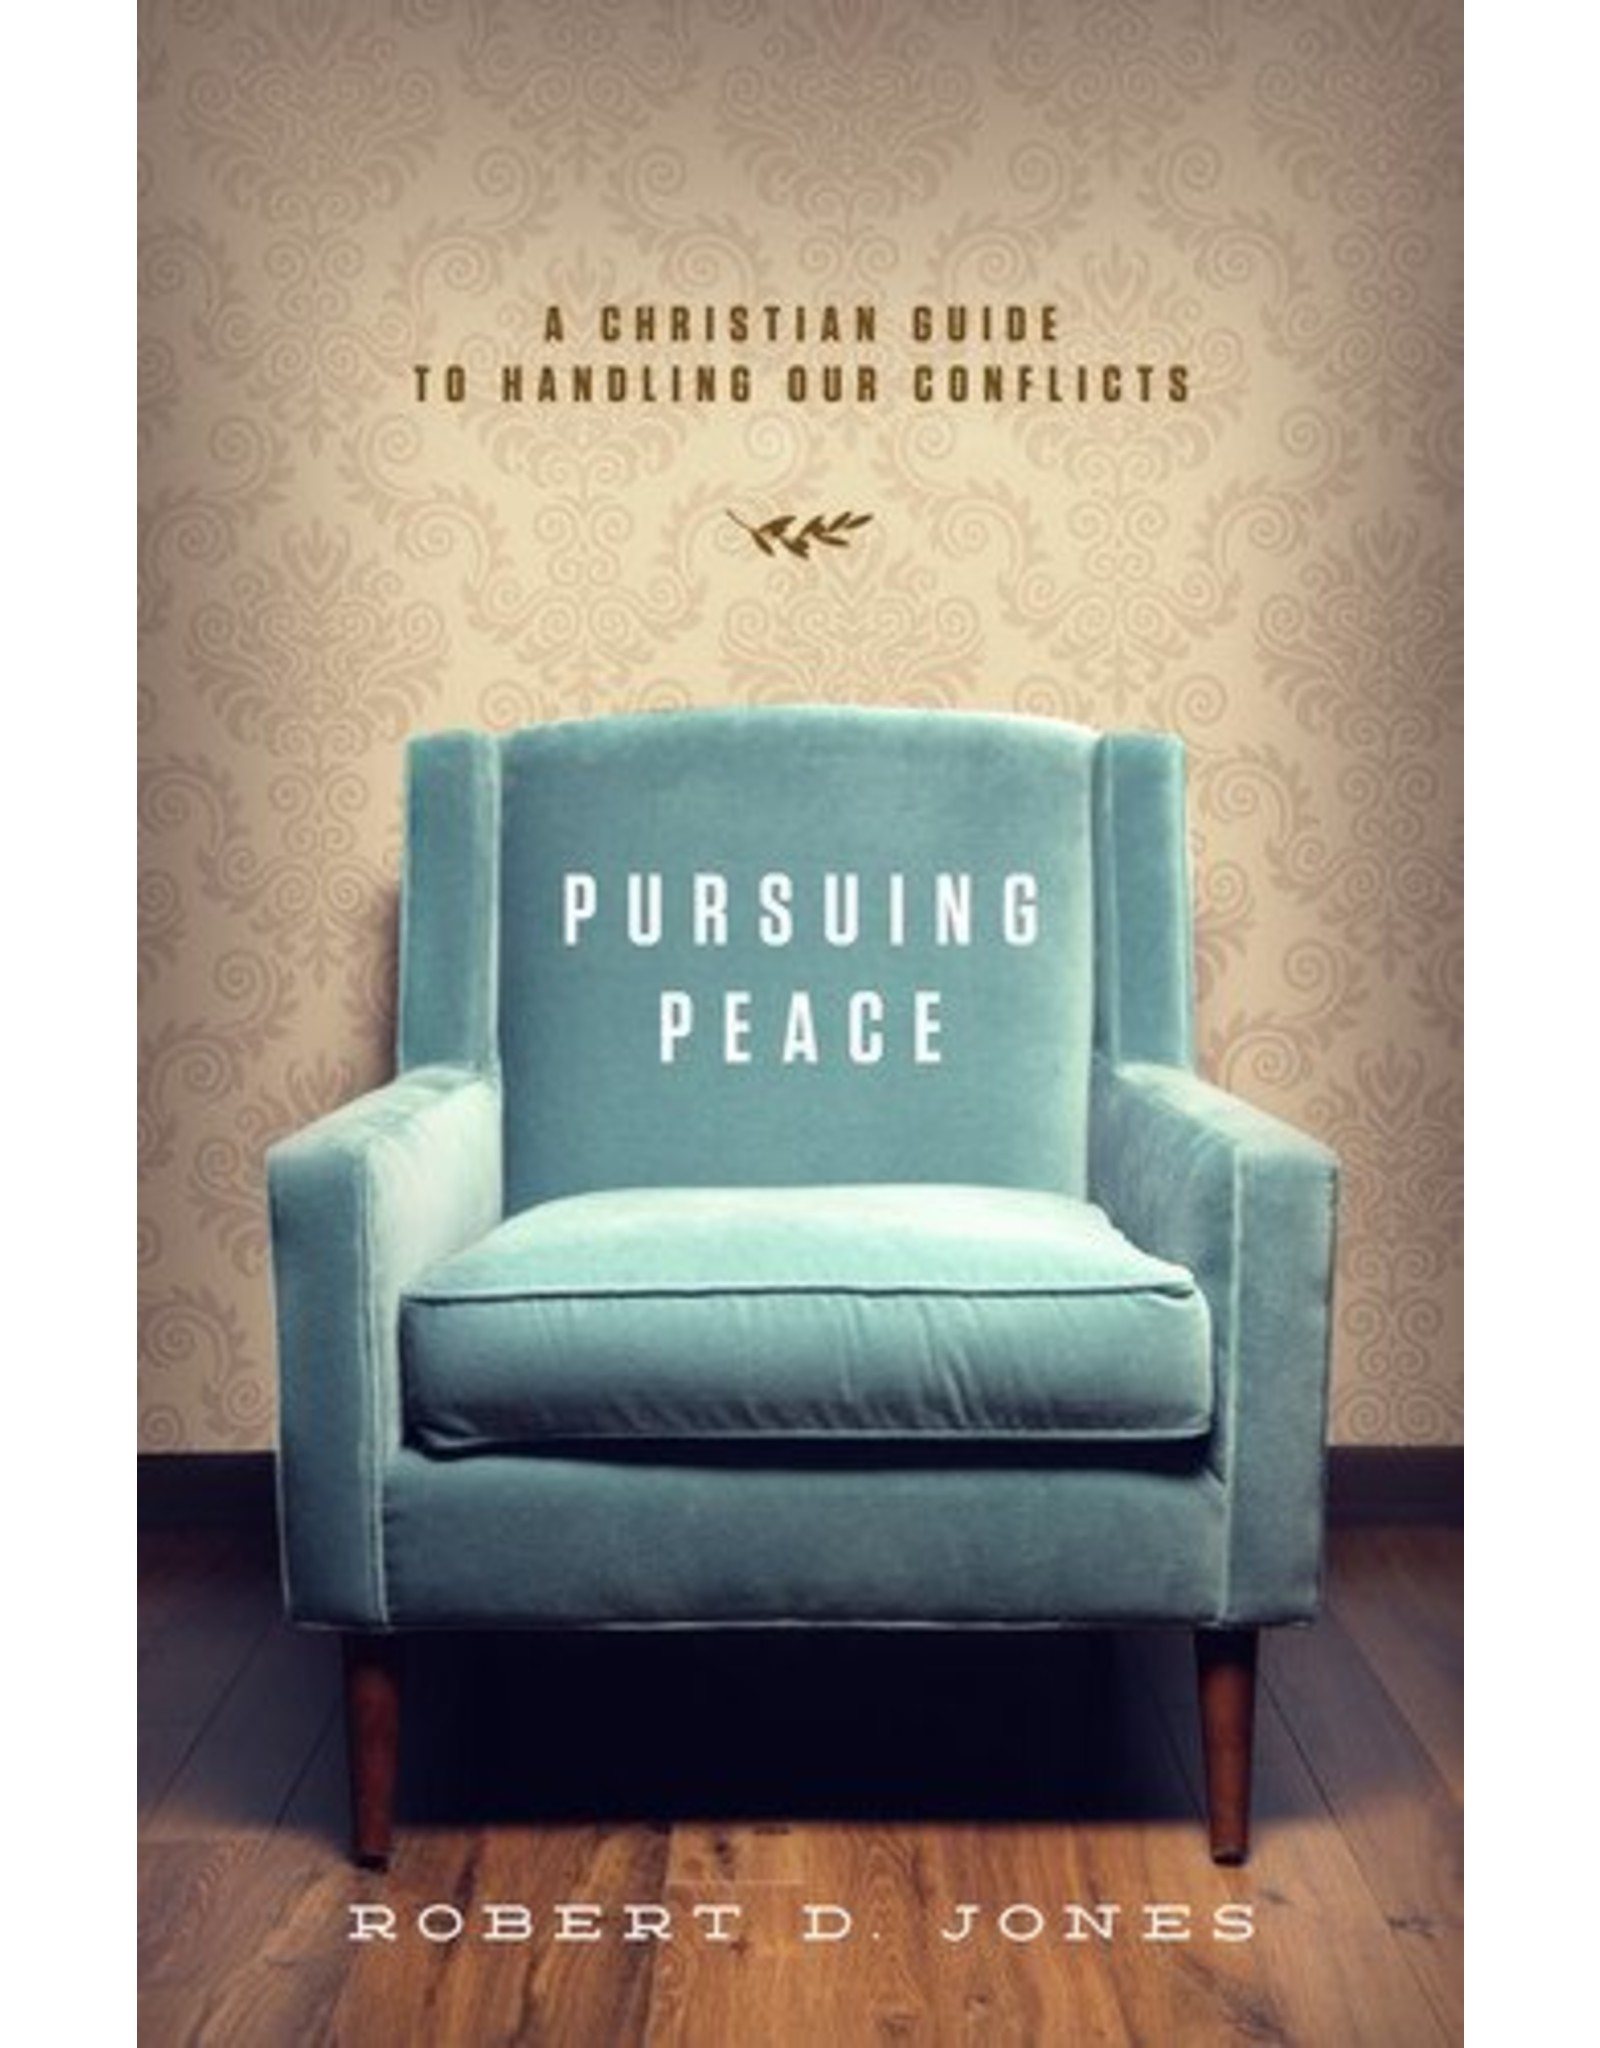 Crossway / Good News Pursuing Peace: A Christian Guide to Handle Our Conflicts